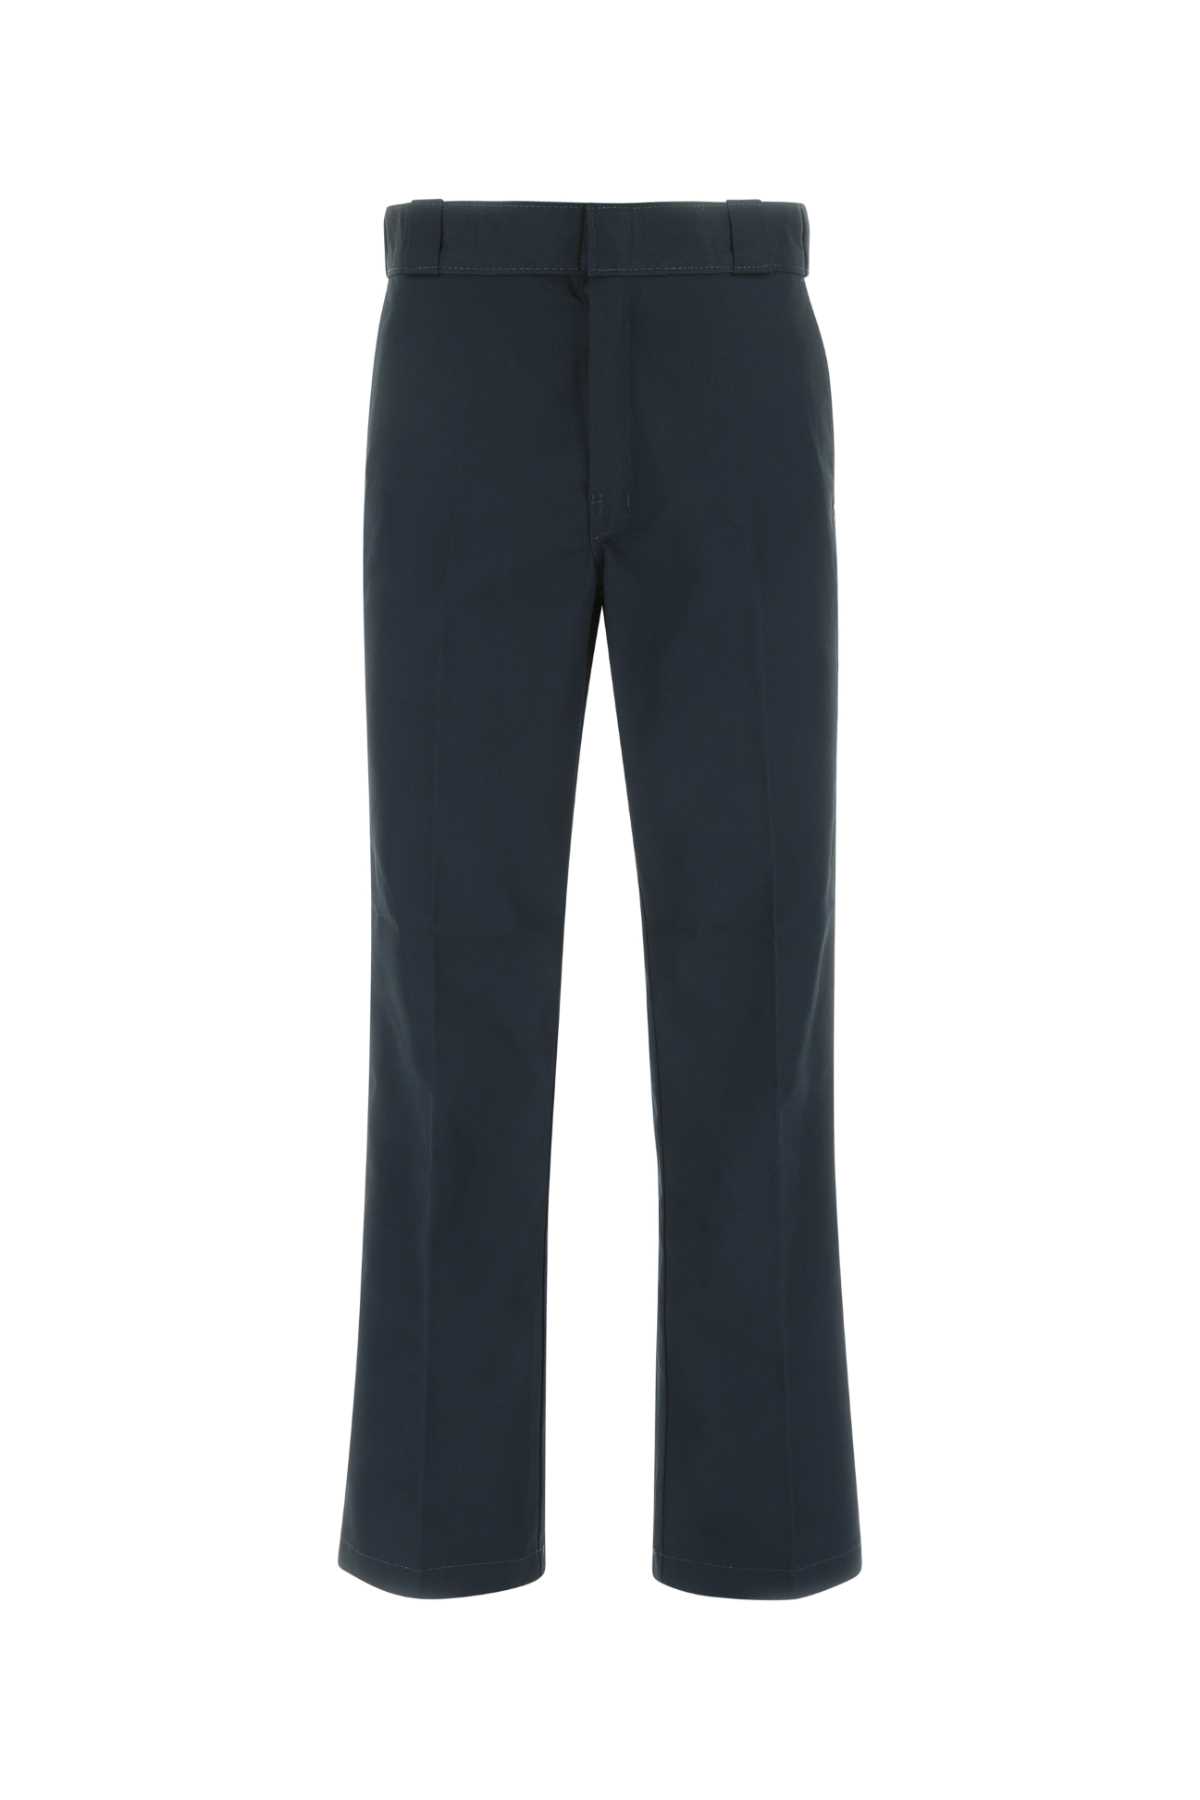 Midnight Blue Polyester Blend Pant